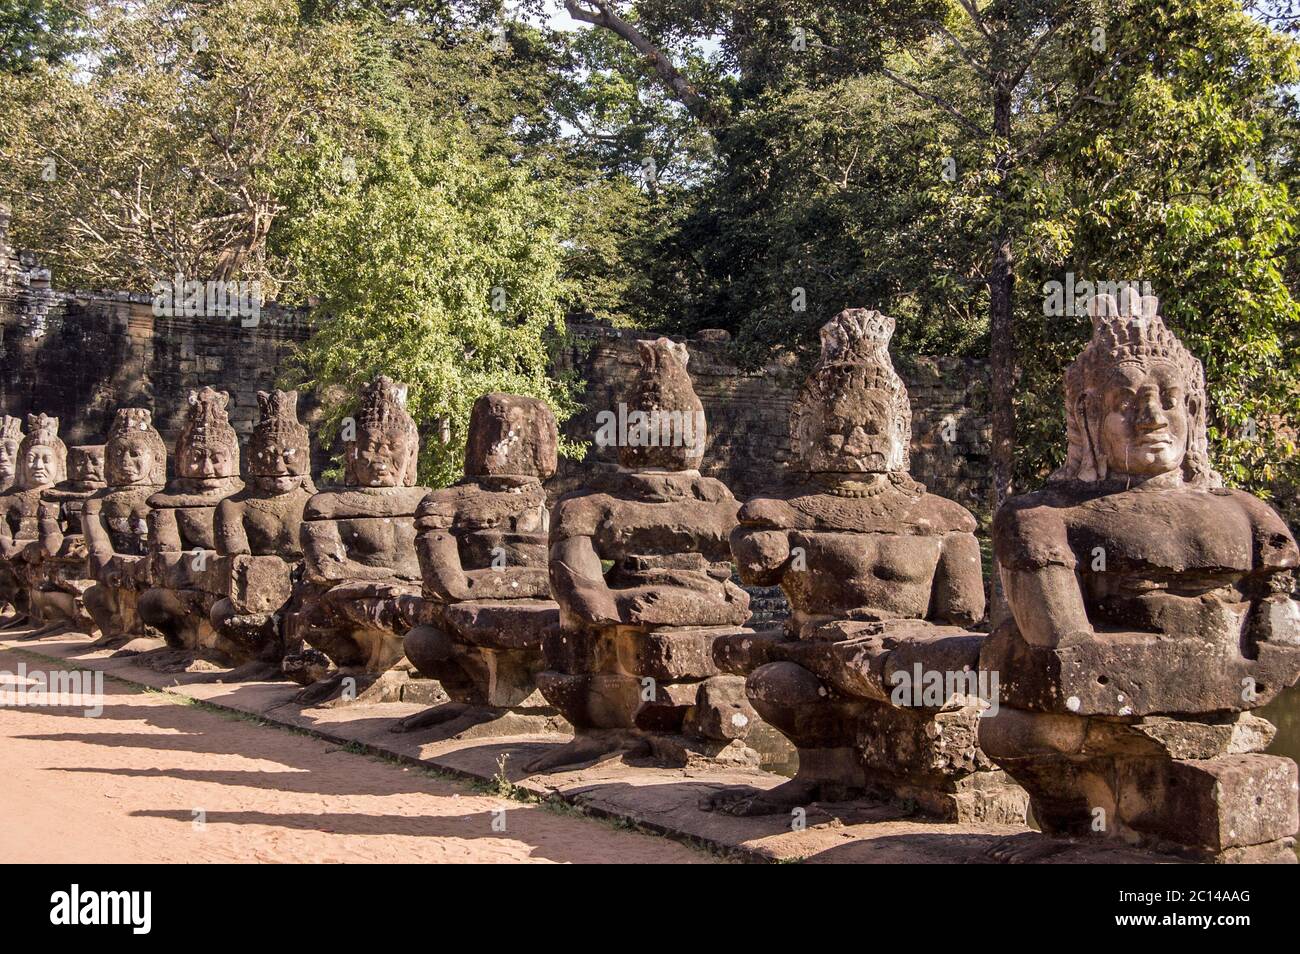 Asuras, or devils, pulling the Naga snake across the East gate entrance to Angkor Thom, Cambodia. The statues are part of a representation of the Chur Stock Photo